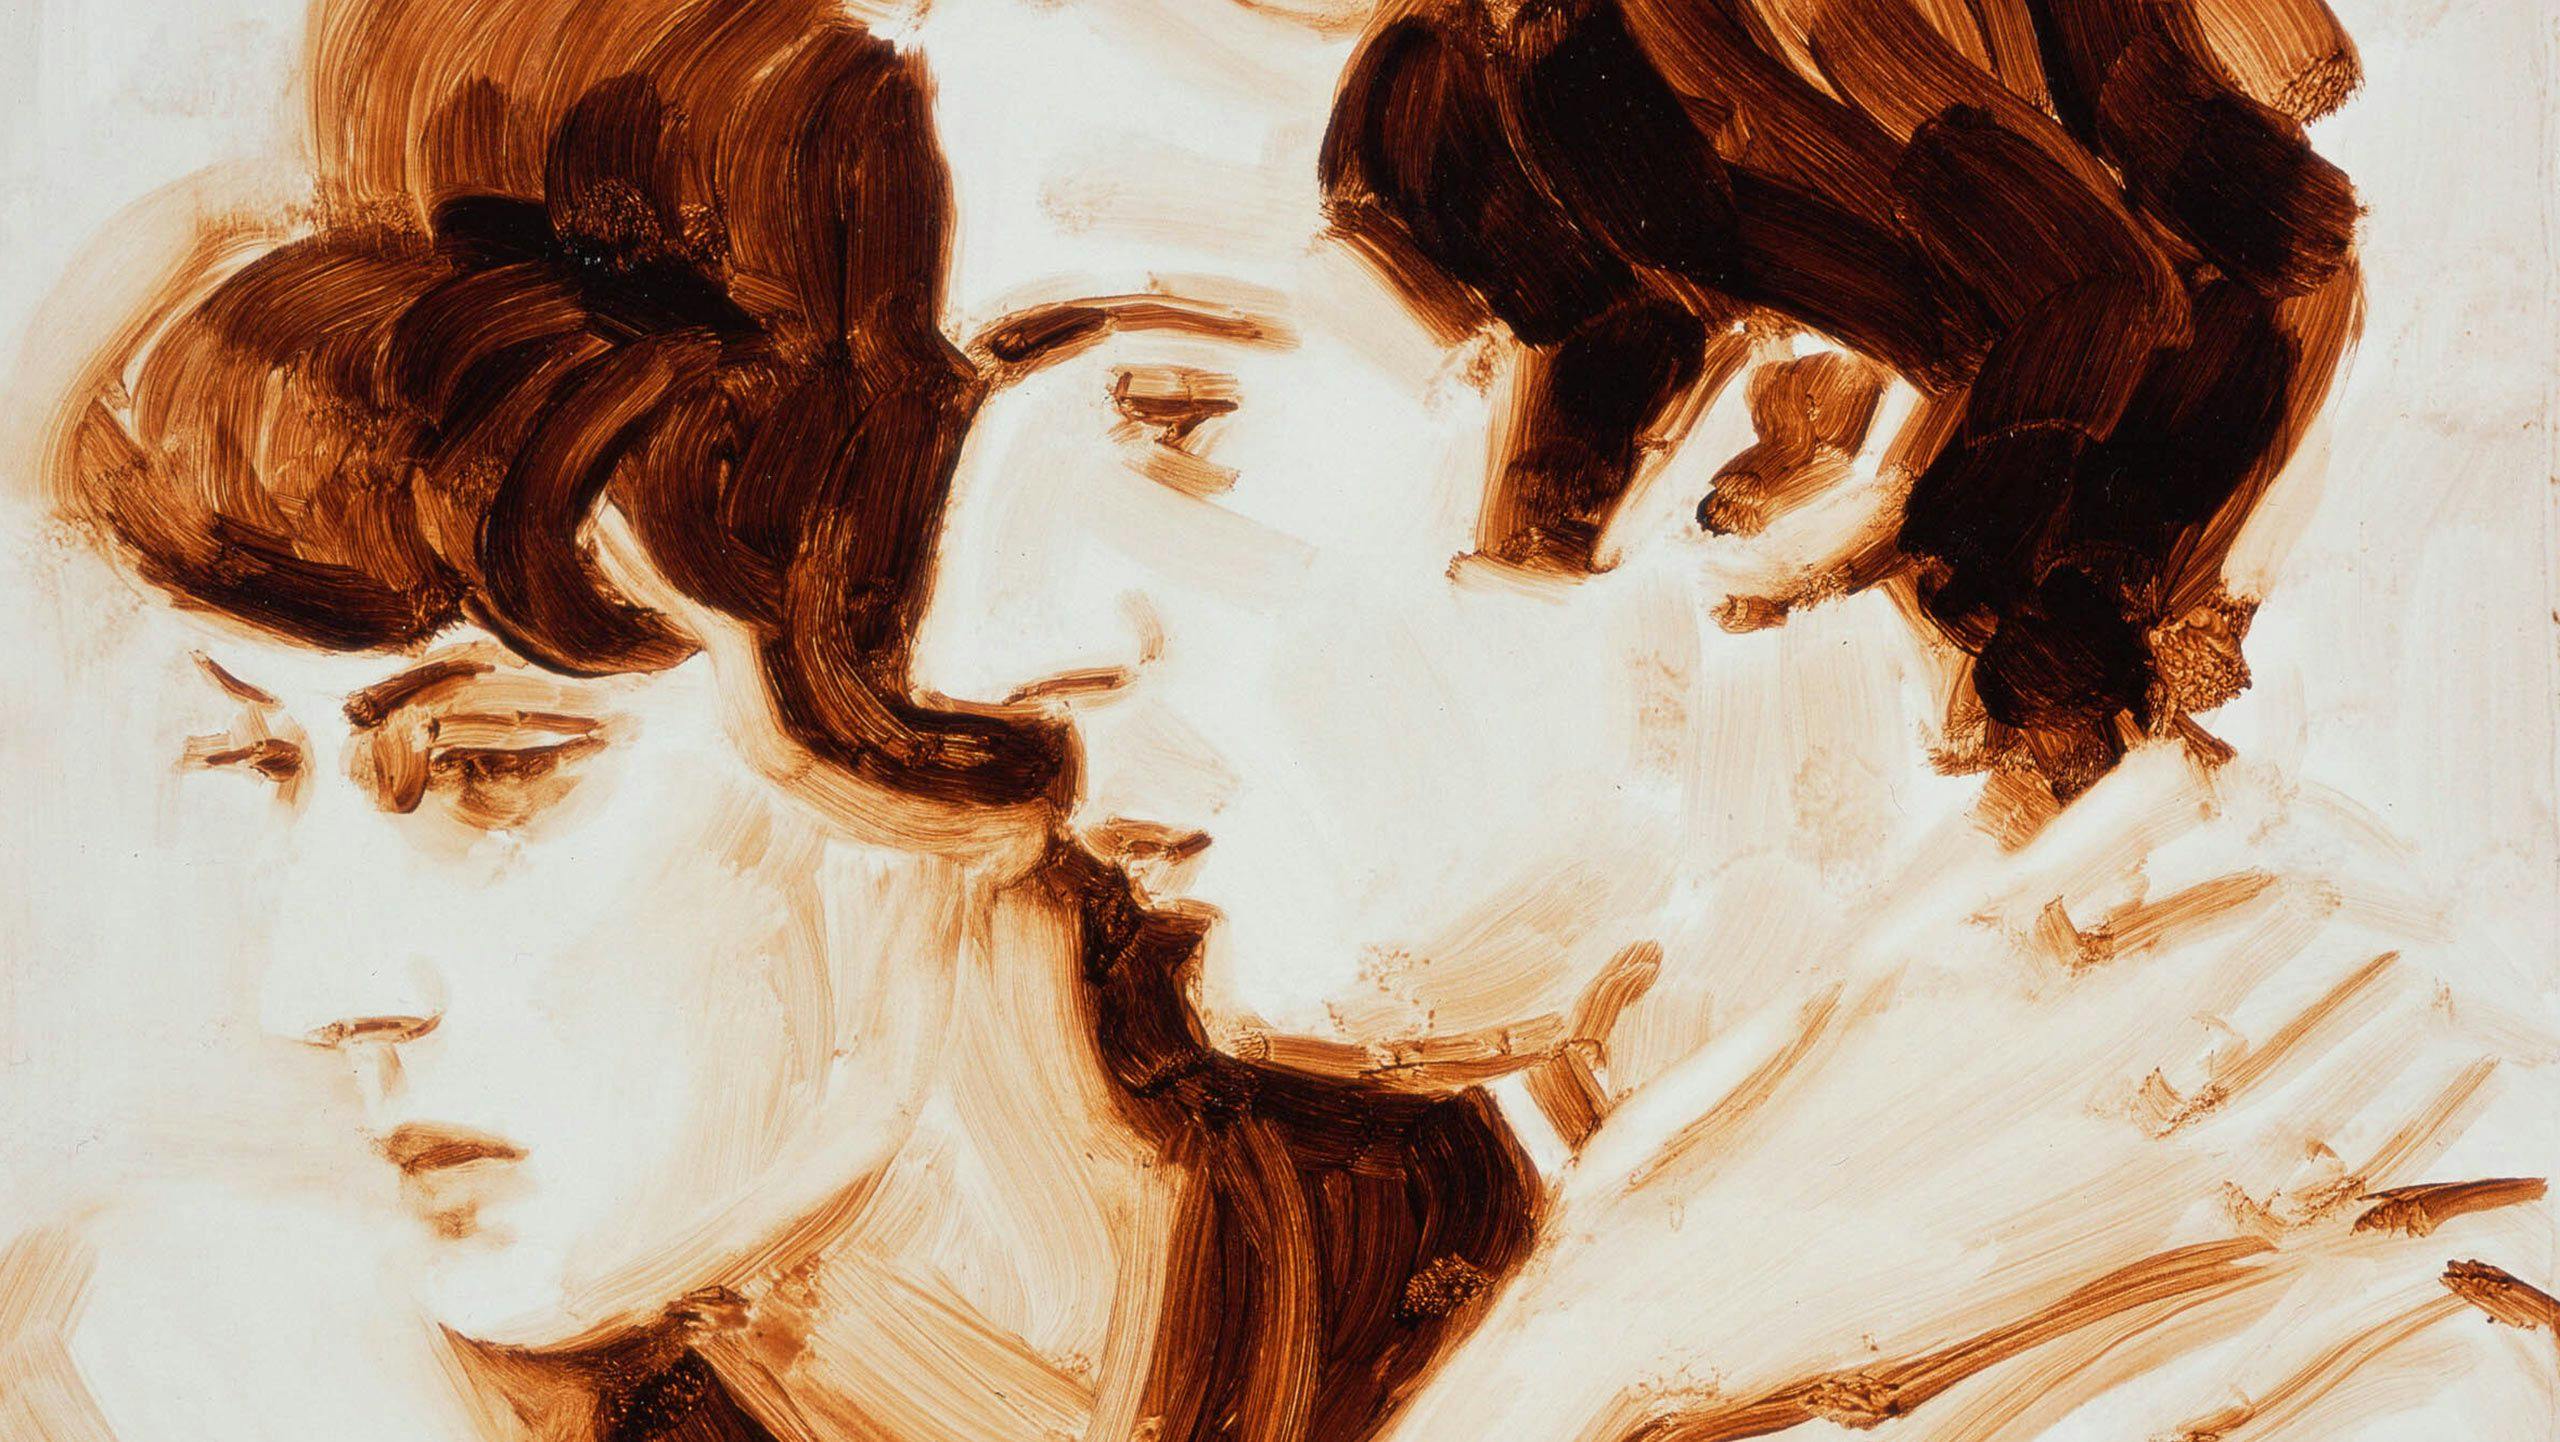 A painting by Elizabeth Peyton titled Jeanne Moreau and François Truffaut (The Bride Wore Black), dated 2005.